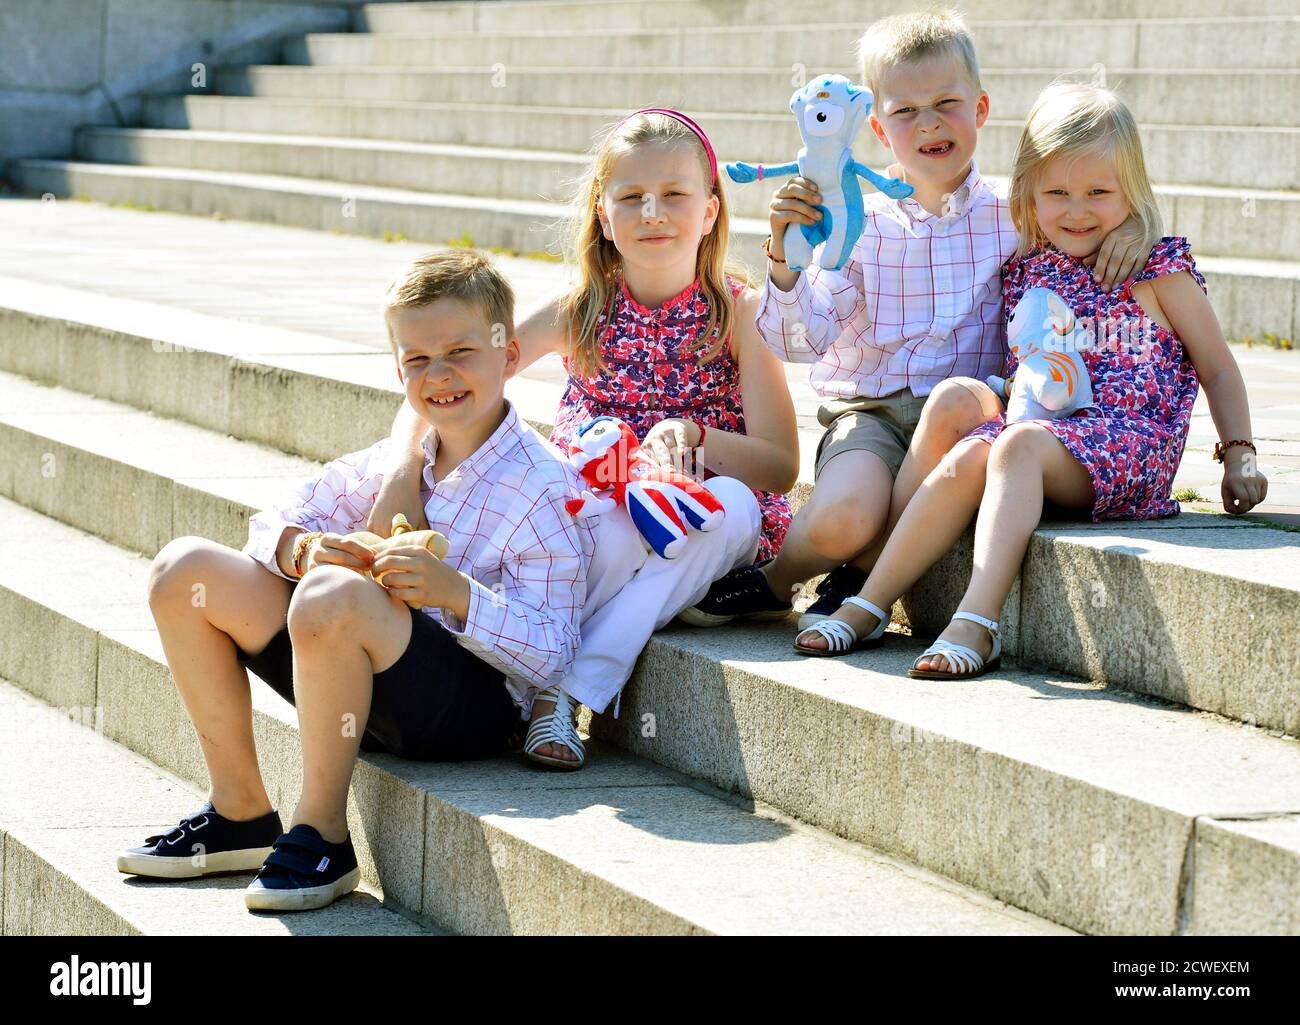 (L-R) Belgium's Prince Gabriel, Princess Elisabeth, Prince Emmanuel and Princess Eleonore pose for photographers in central London ahead of the London 2012 Olympic Games July 26, 2012. Picture taken on July 26, 2012.                  REUTERS/Benoit Doppagne/Pool   (BRITAIN  - Tags: SPORT ROYALS POLITICS SPORT OLYMPICS) Stock Photo